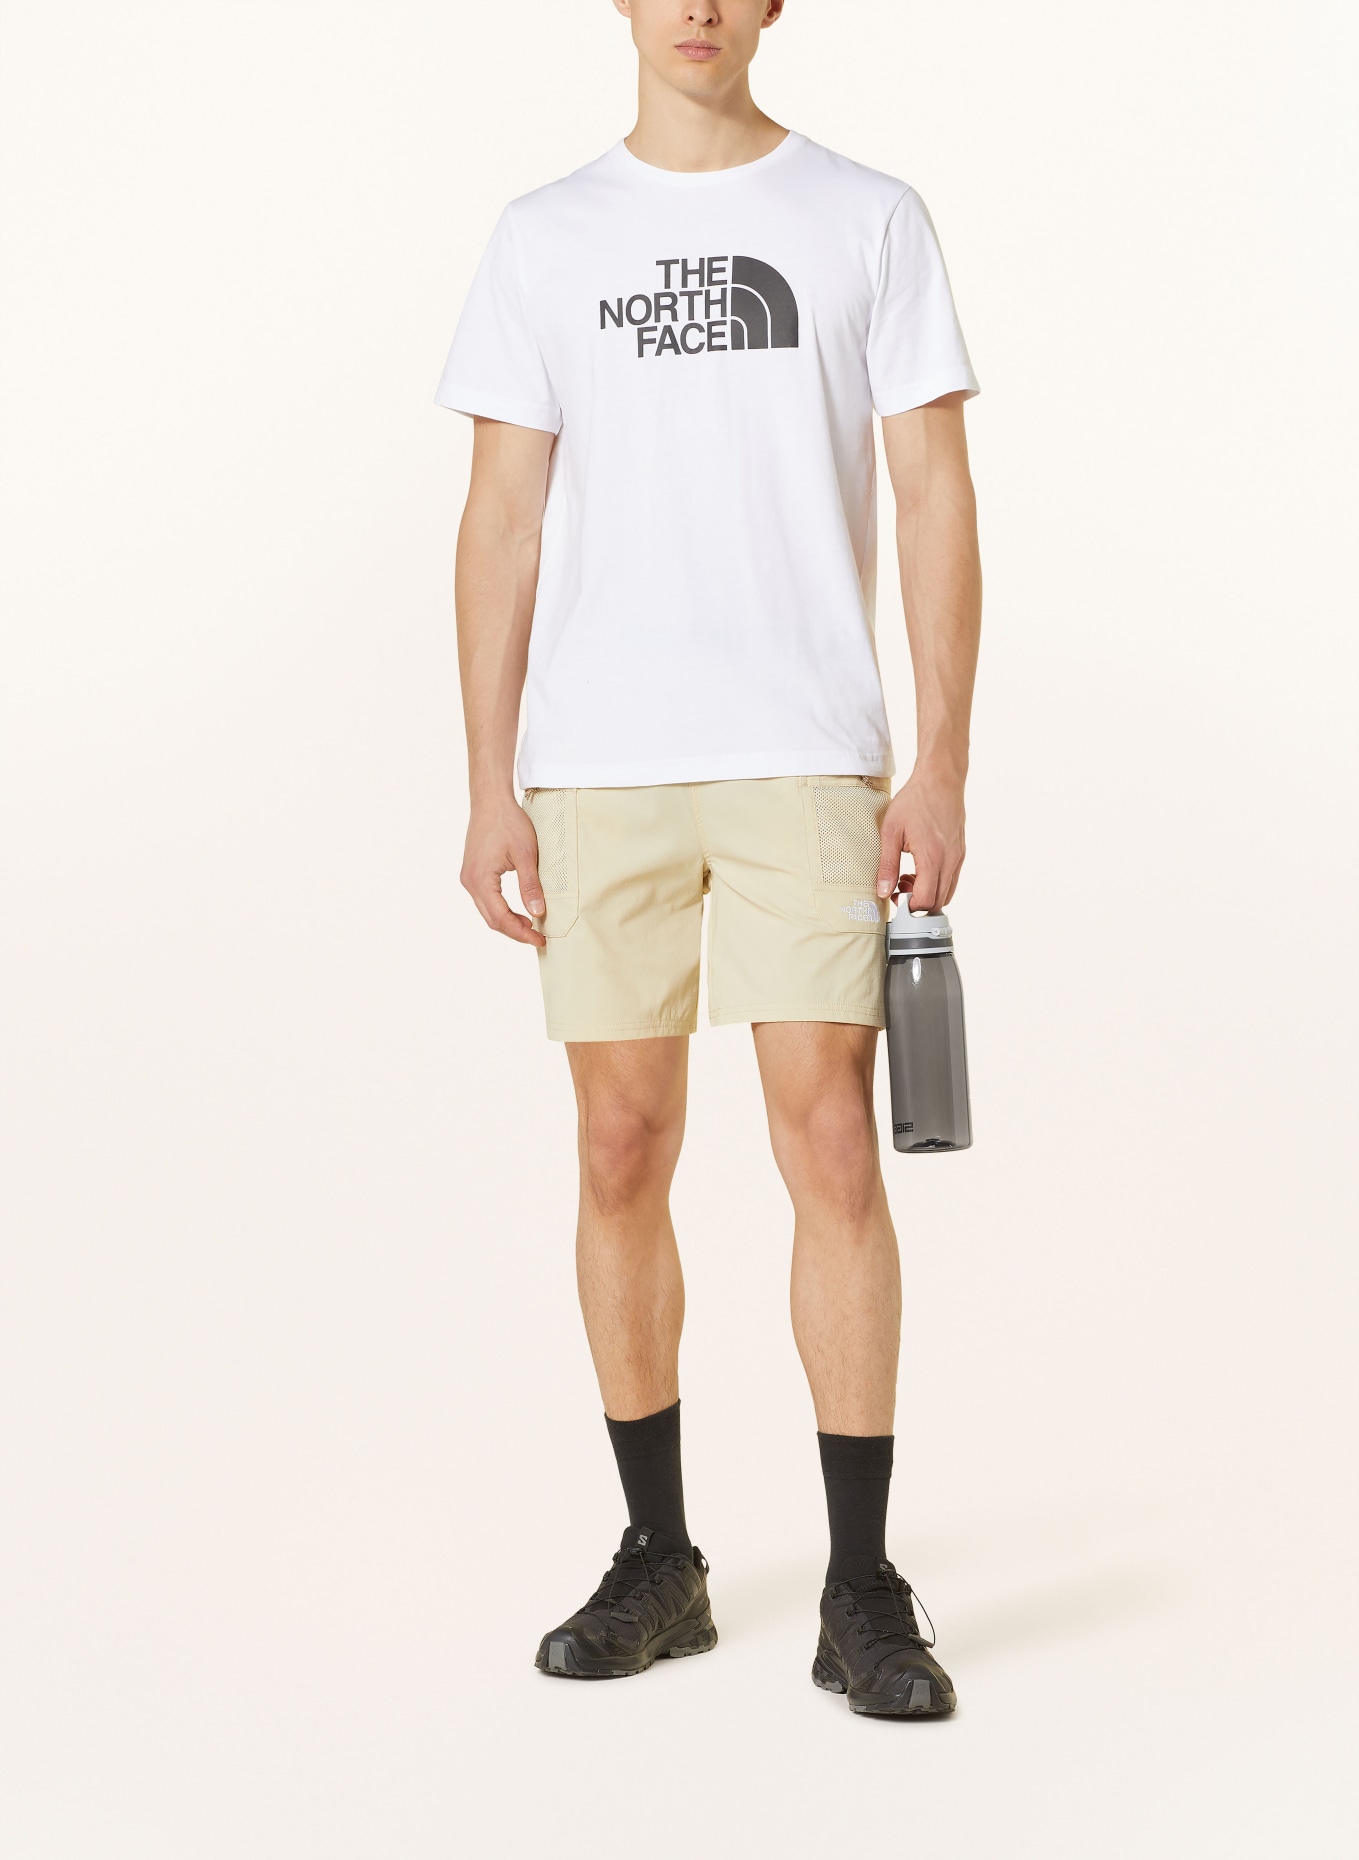 THE NORTH FACE Trekking shorts PATHFINDER, Color: LIGHT YELLOW (Image 2)